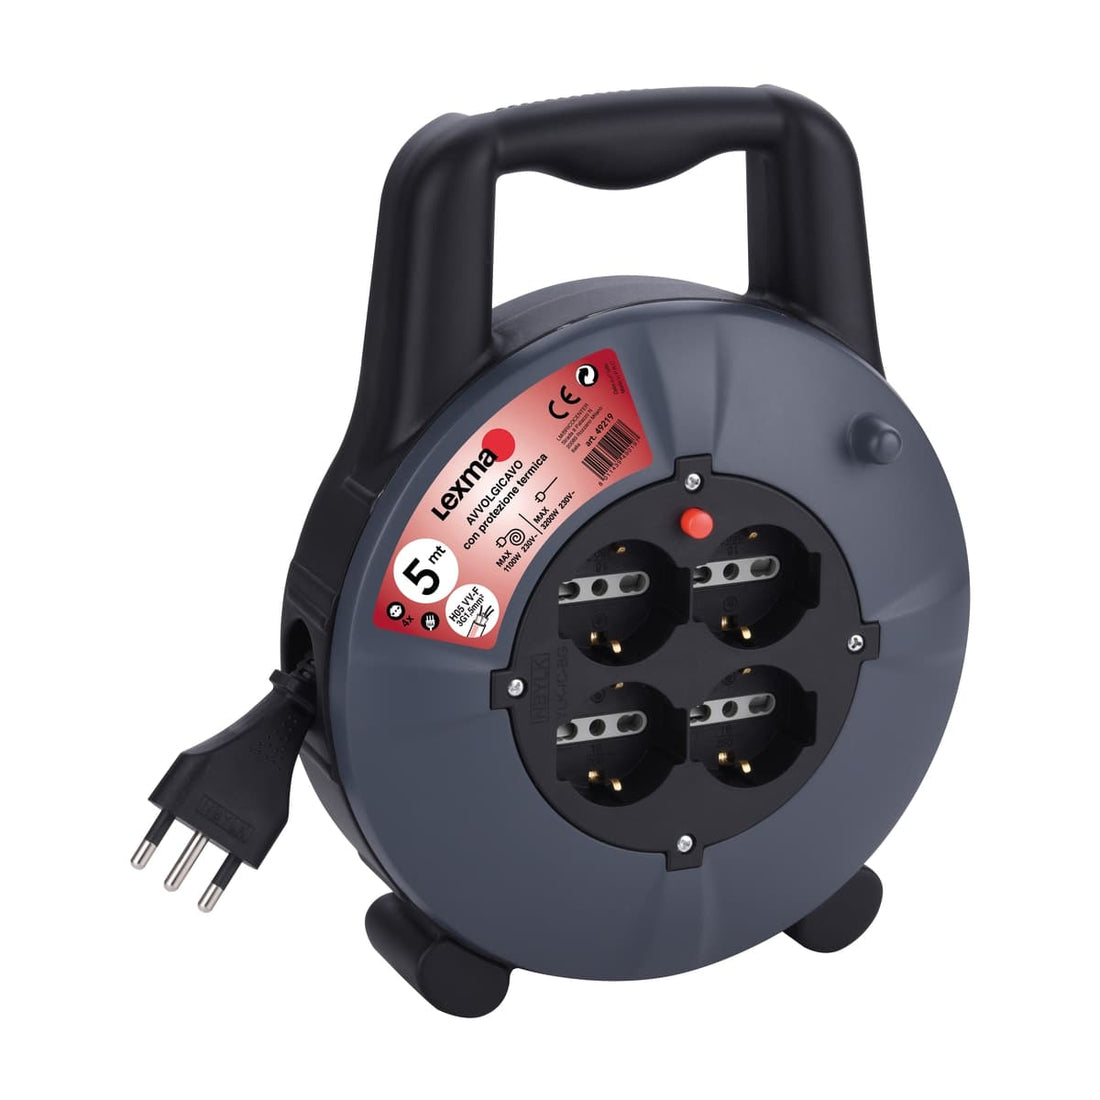 CABLE REEL 5MT PLUG 16A 4 UNIVERSAL SOCKETS WITH THERMAL CIRCUIT BREAKER - best price from Maltashopper.com BR420003062